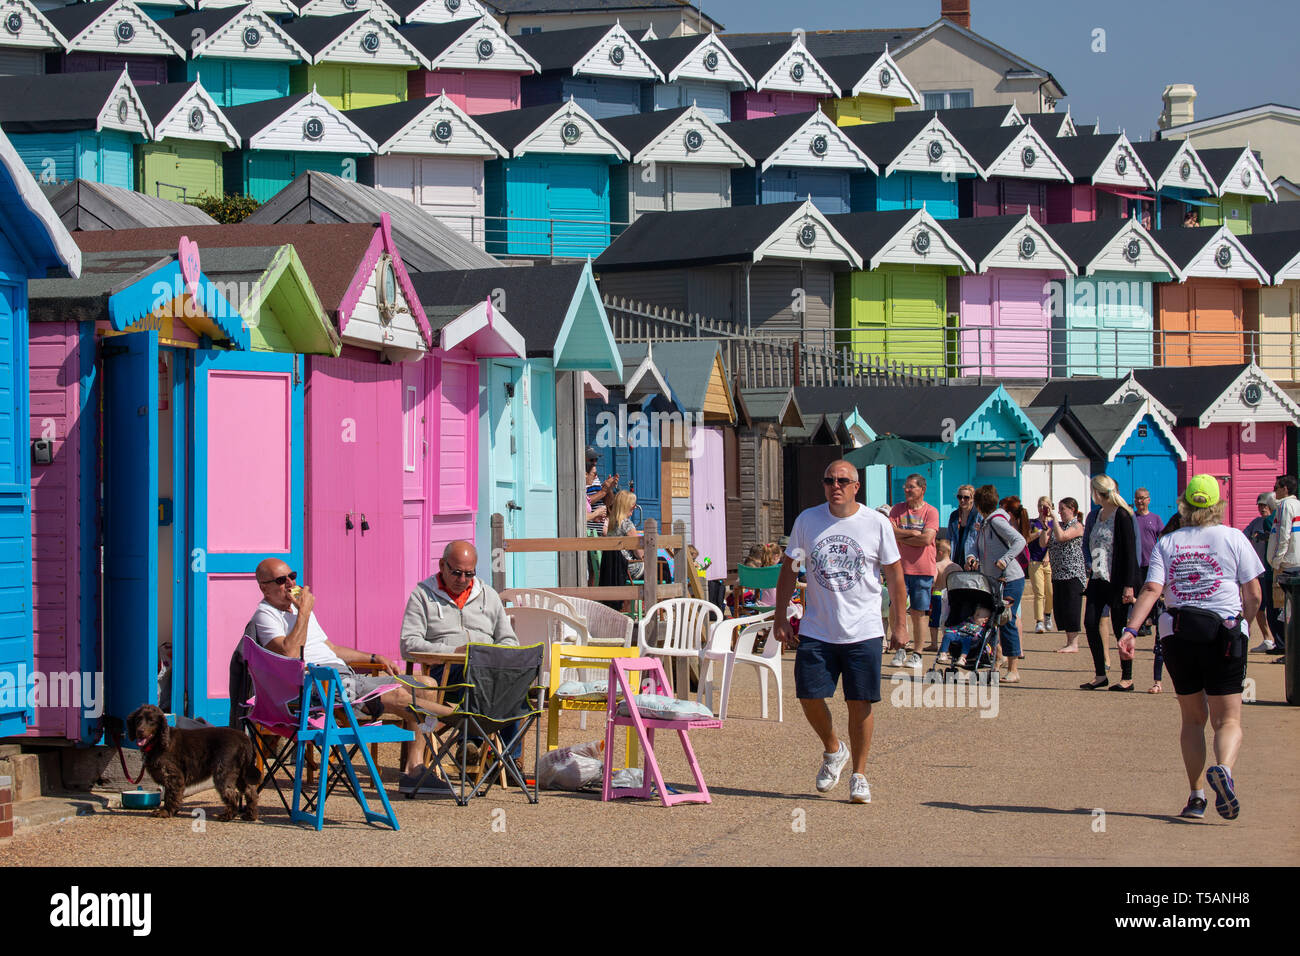 Picture dated April 21st shows people out on the beach and promenade by the colourful beach huts in Walton-on-the-Naze,Essex,on Easter Sunday afternoon and making the most on the hot weather. Stock Photo